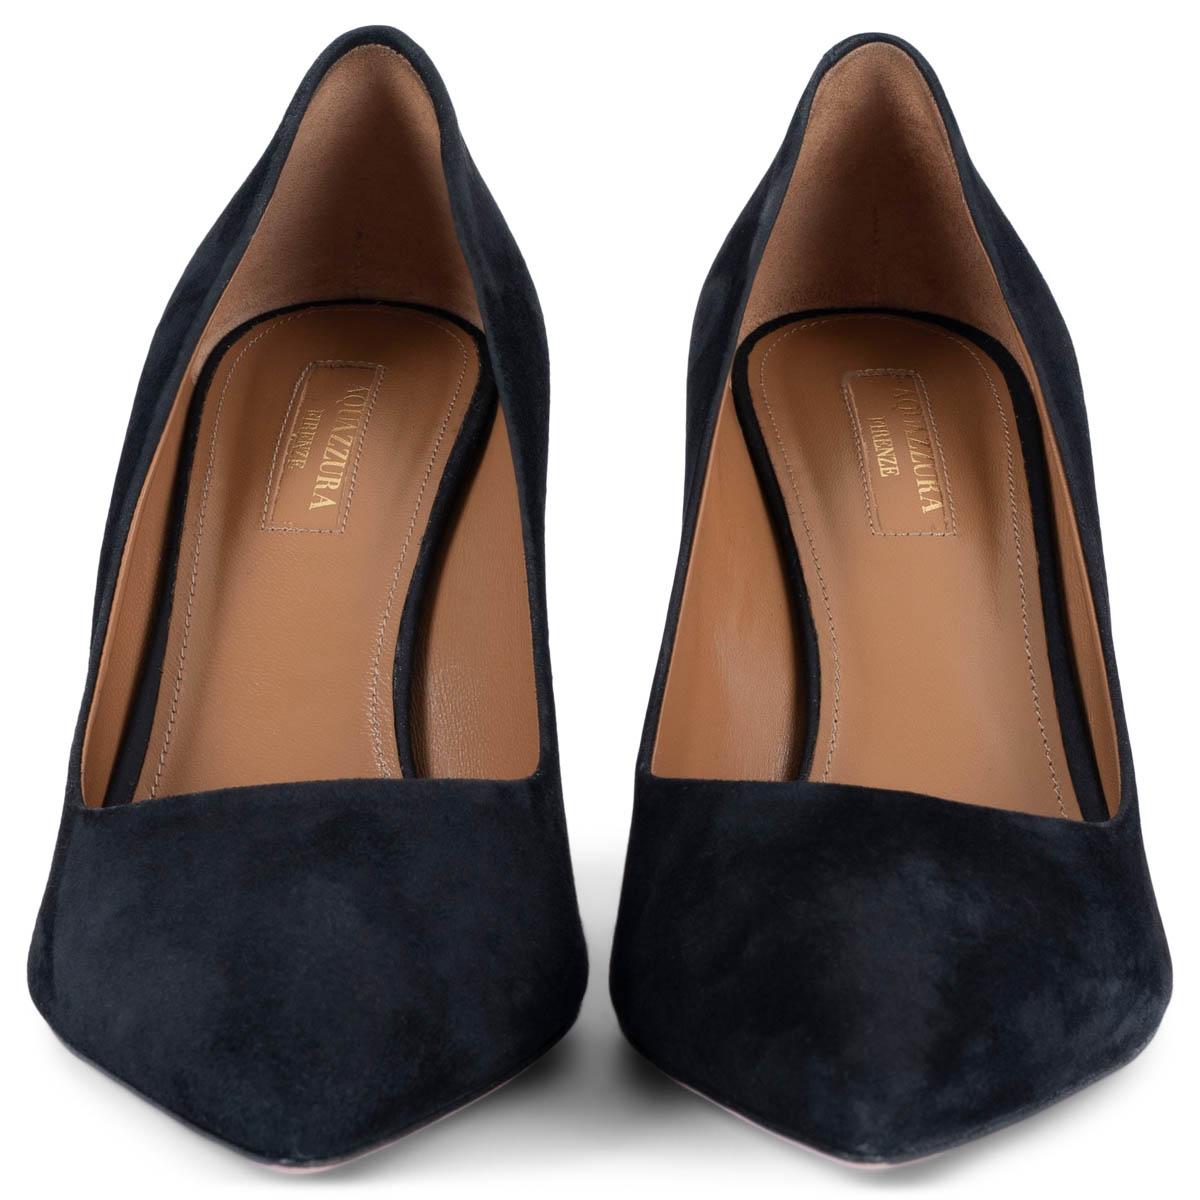 100% authentic Aquazzura Purist 85 pointed-toe pumps in black suede. Brand new. 

Measurements
Imprinted Size	39
Shoe Size	39
Inside Sole	26cm (10.1in)
Width	7.5cm (2.9in)
Heel	8.5cm (3.3in)

All our listings include only the listed item unless